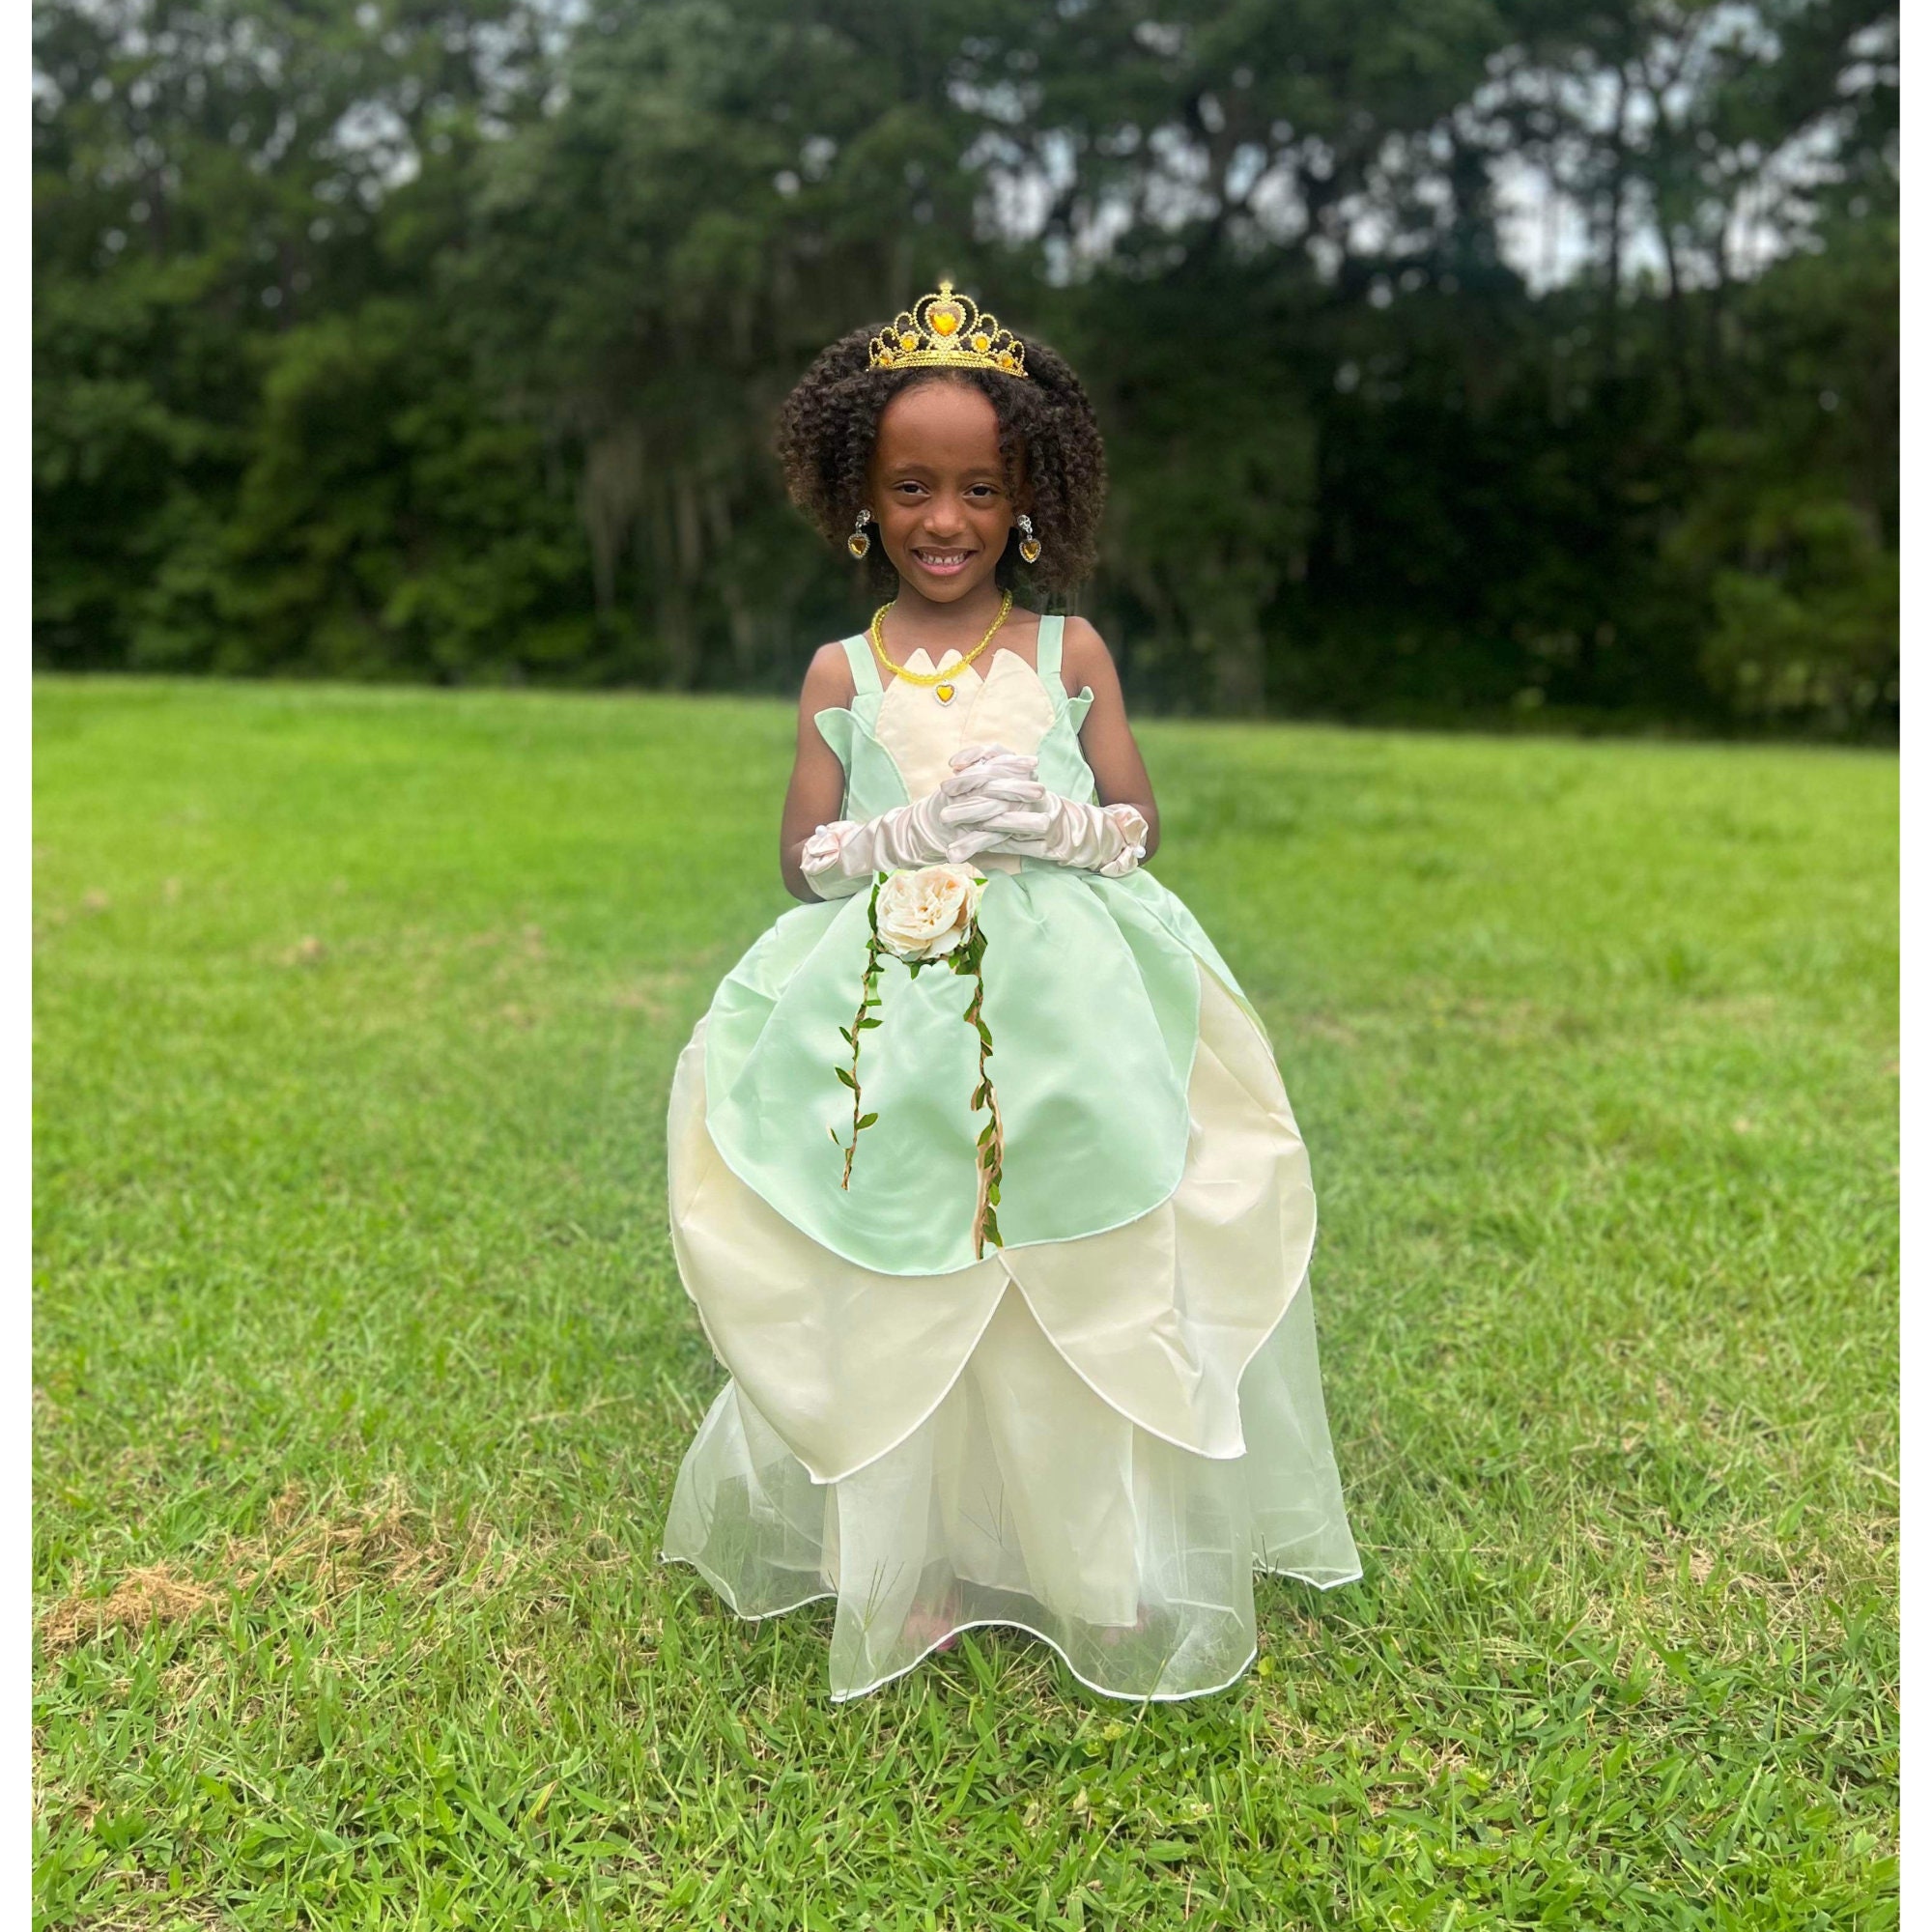 Buy Tiana Dress & Accessories, Tiana Dress, Princess and the Frog, Princess  Tiana Costume, Princess Tiana PERSONALIZED GIFT SET Online in India 